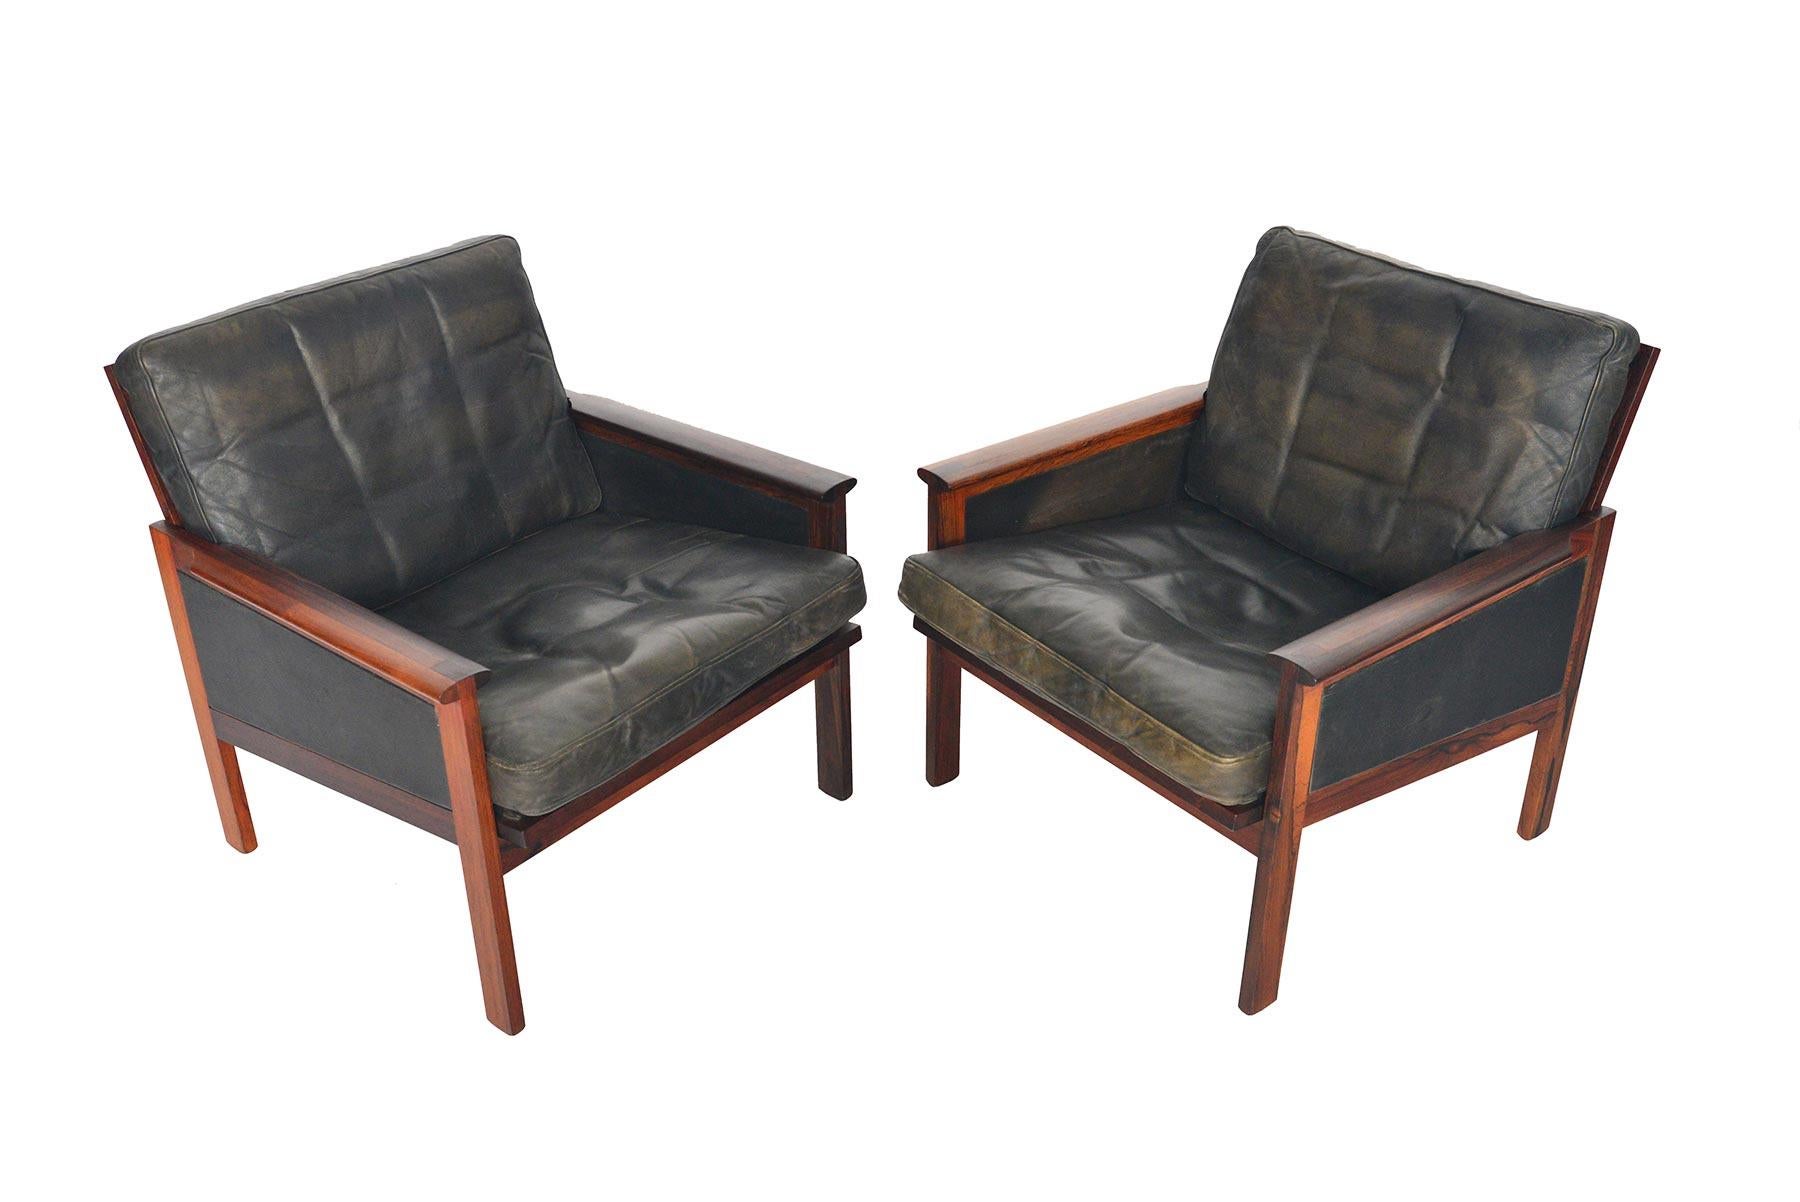 This pair of Danish modern lounge chairs was designed by Illum Wikkelsø as the ‘Capella’ model for N. Eilersen in 1959. Framed in solid rosewood, this chair features a beautifully crafted finger joint on the armrest. Leather panels rest beneath the